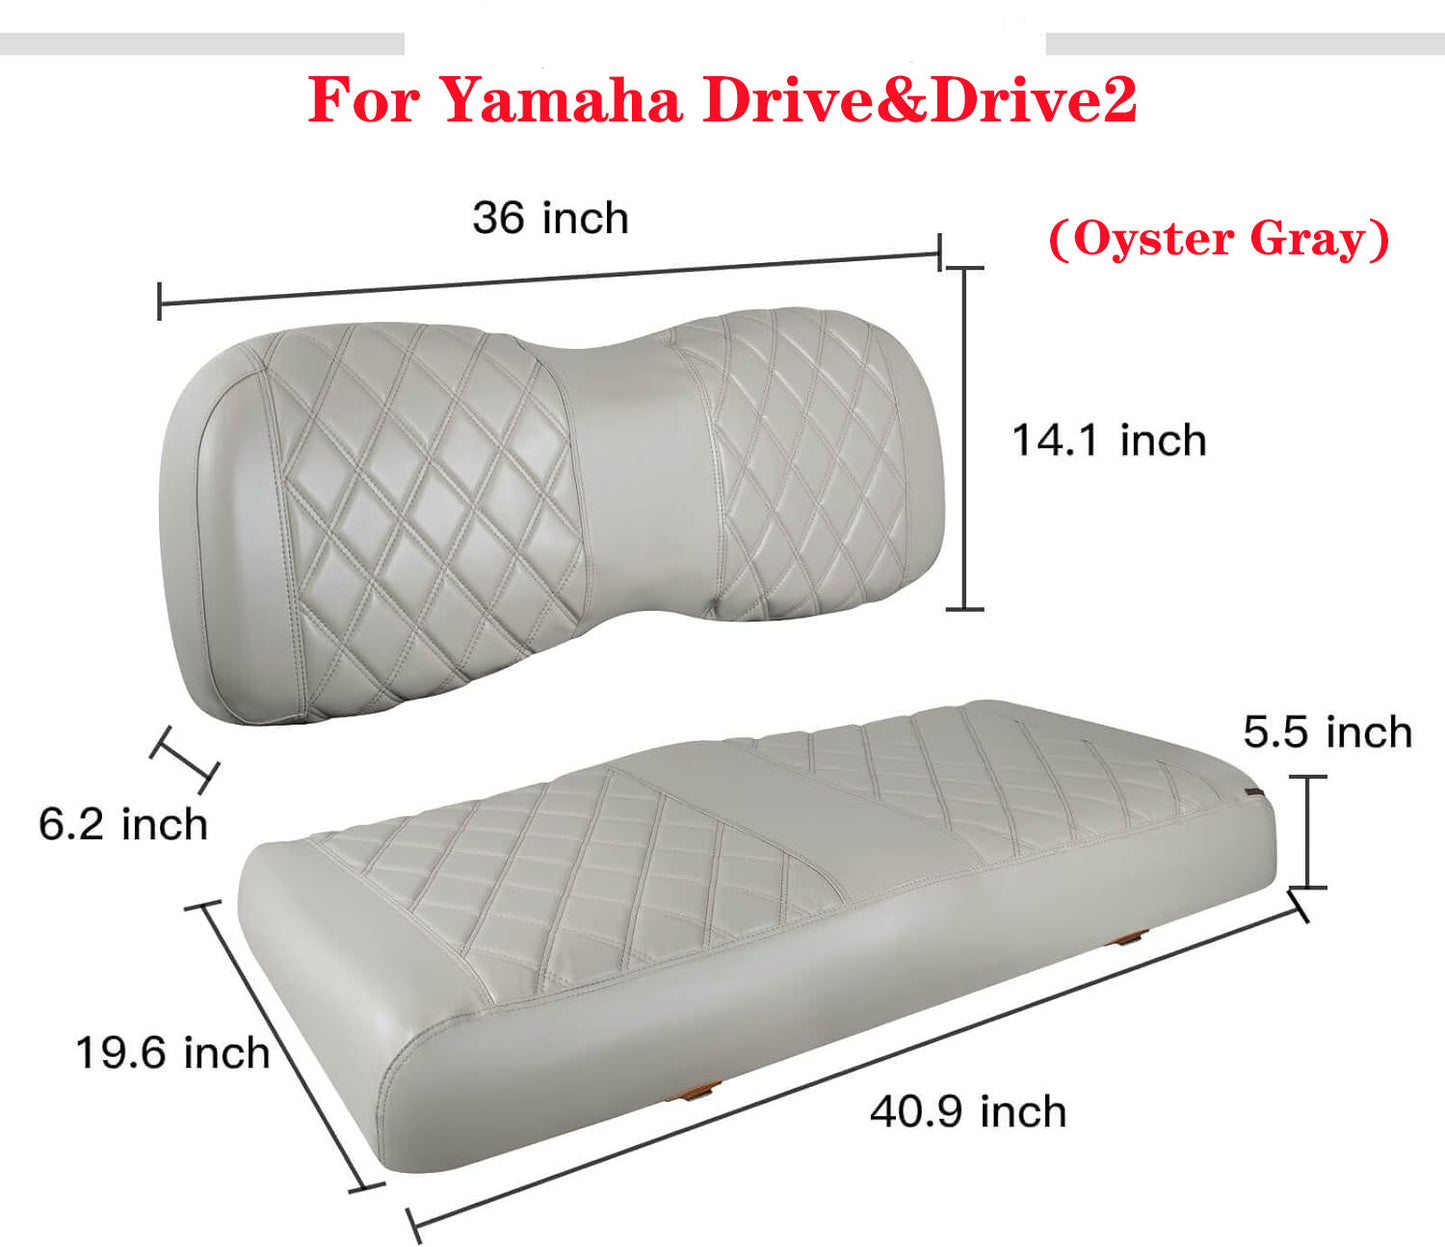 Nokins Seat Cover (Oyster Gray) Yamaha Drive & Drive 2